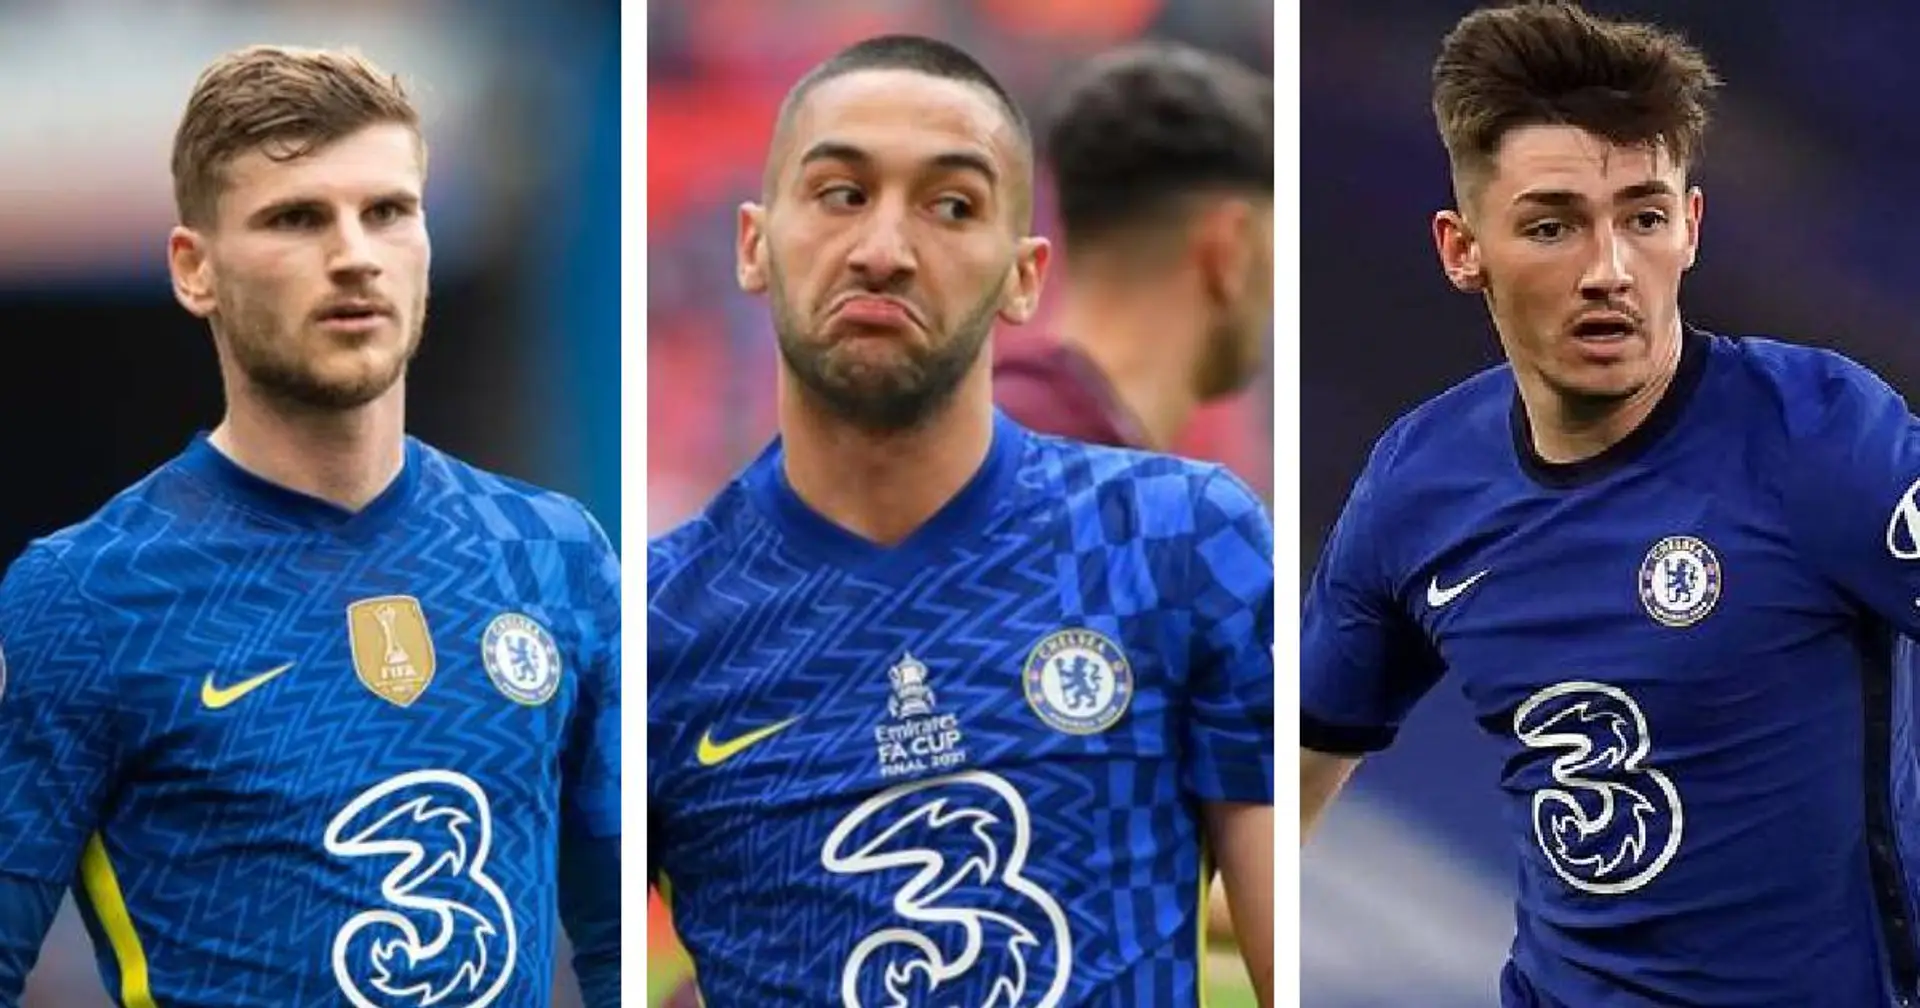 As many as nine players want to leave Chelsea this summer (reliability: 3 stars)